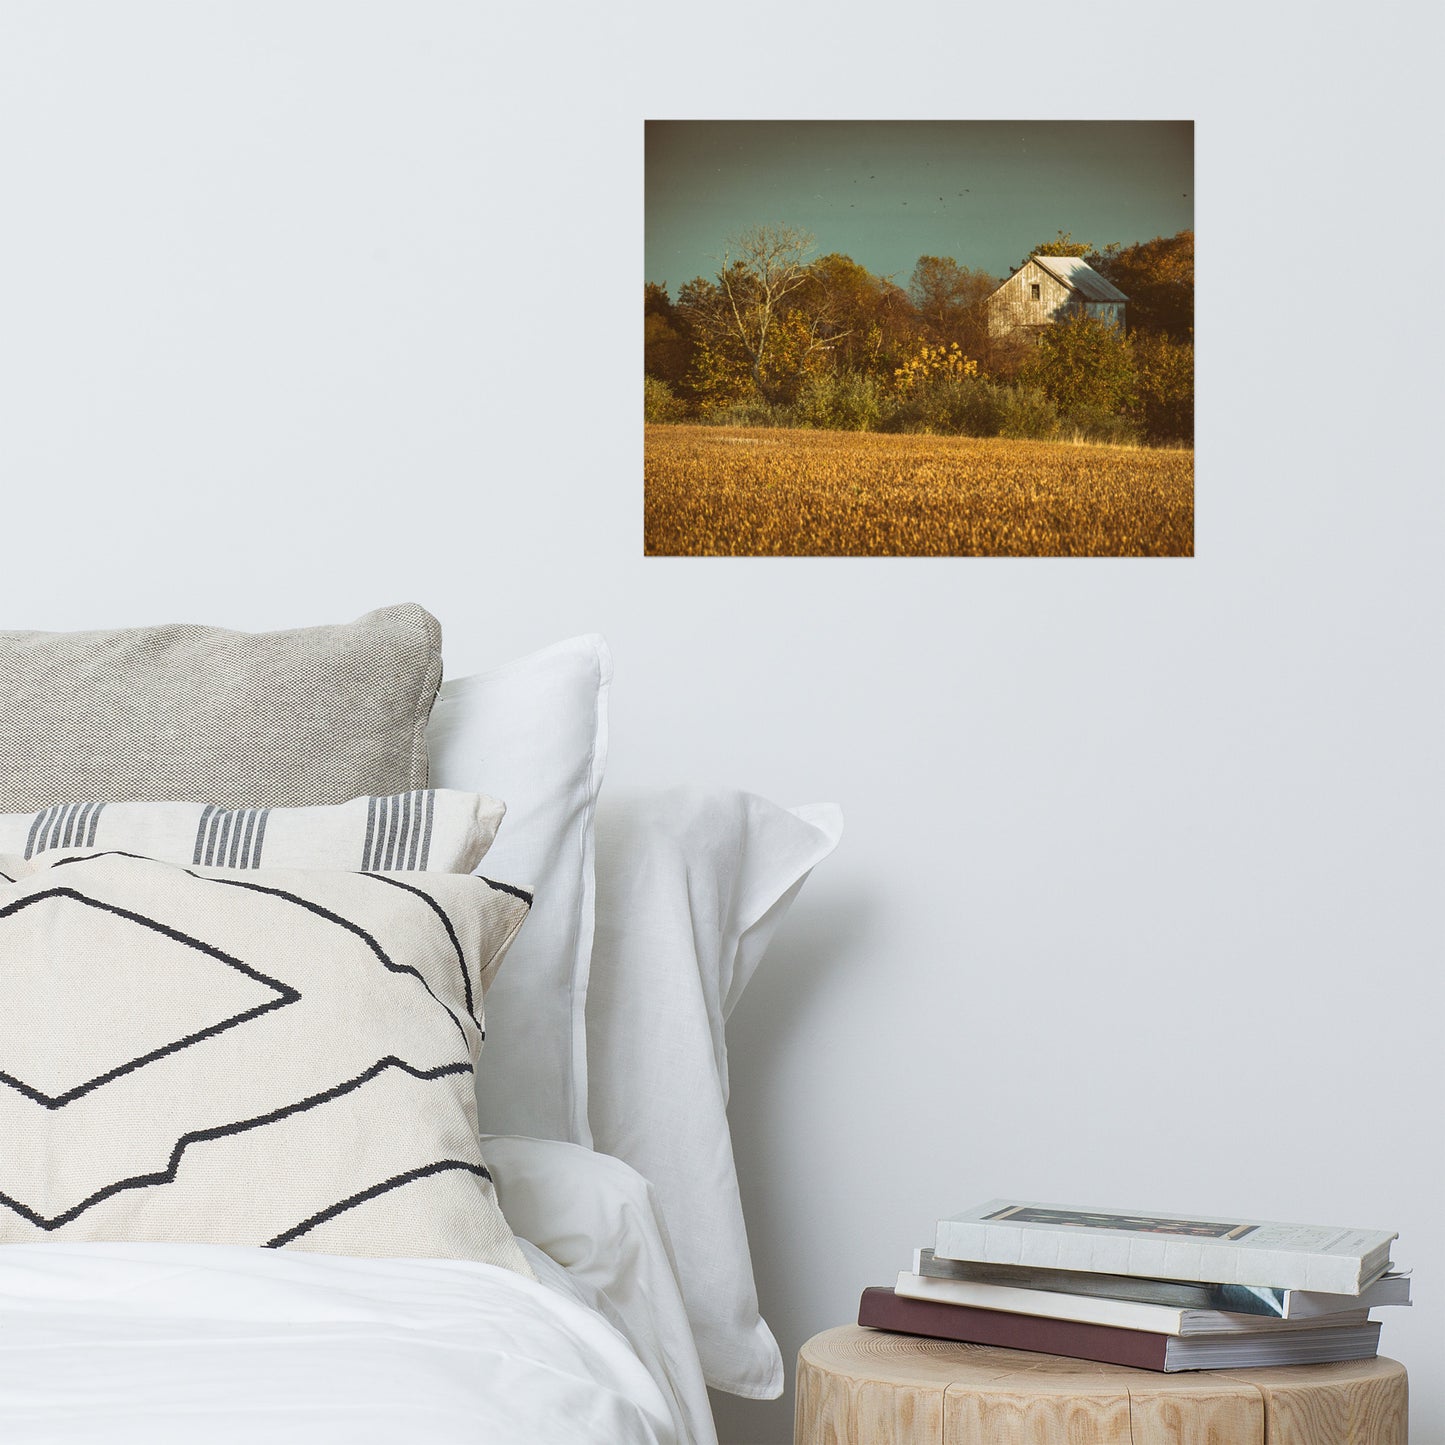 Rustic Home Decor Wall Art: Abandoned Barn Colorized - Rural / Country Style Landscape / Nature Loose / Unframed Wall Art Print - Artwork